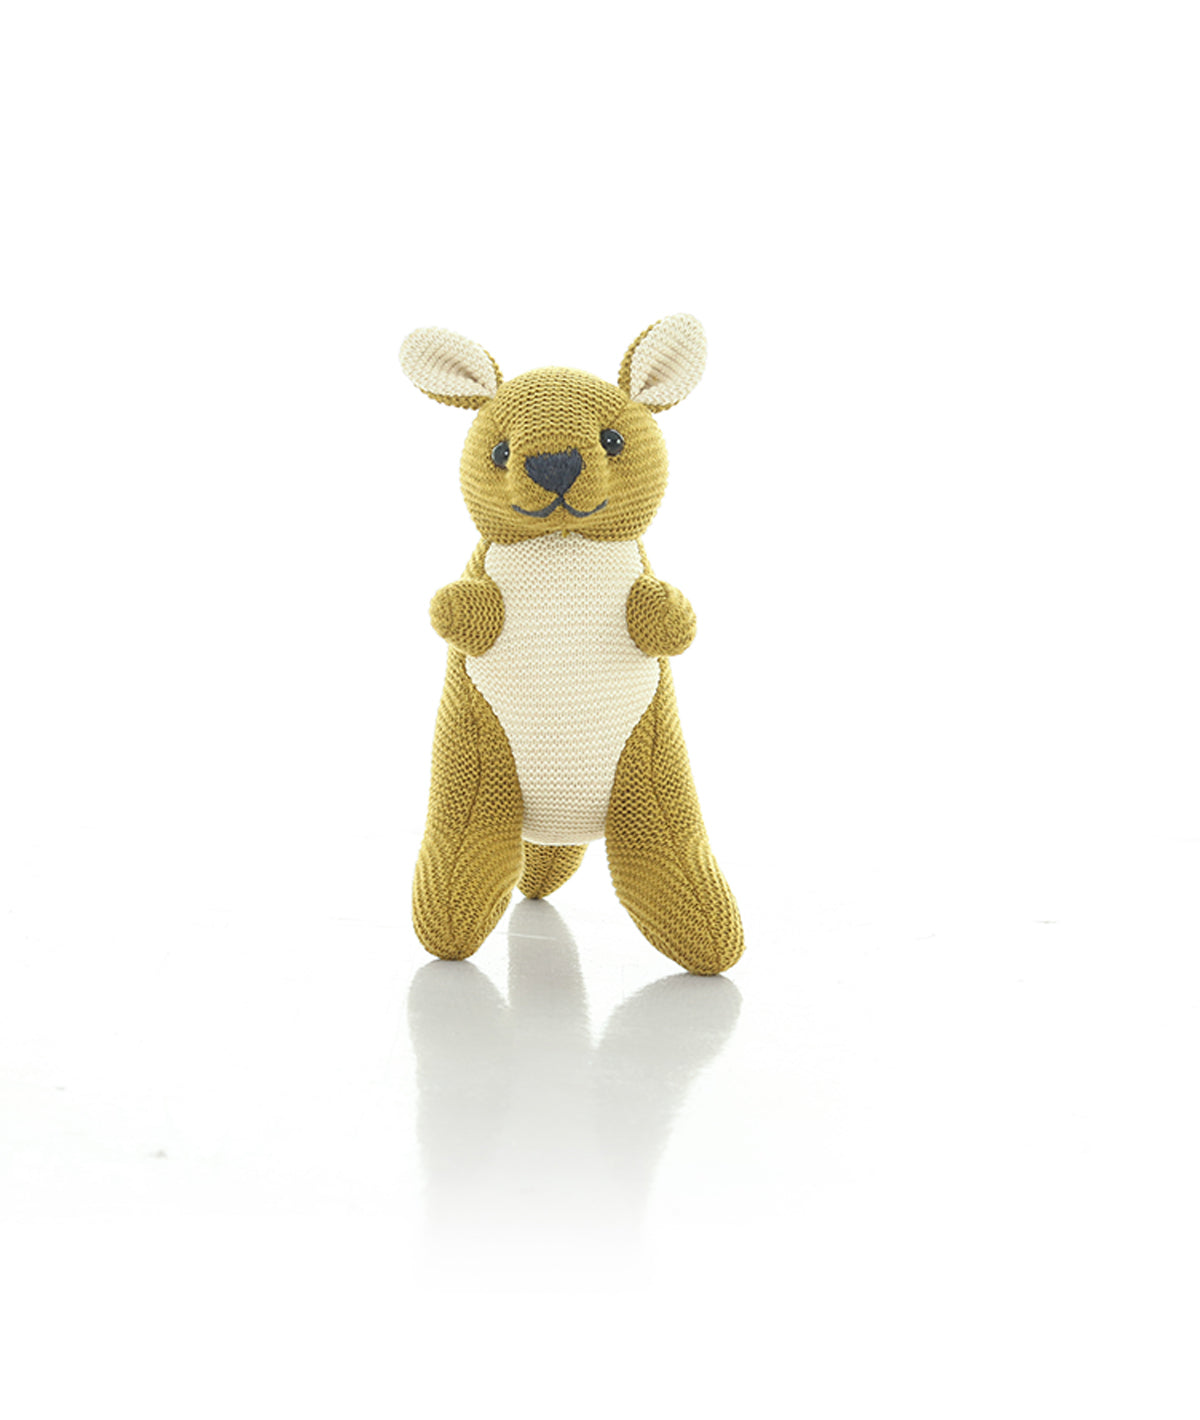 Doodle Kangaroo Rattle Cotton Knitted Stuffed Soft Toy (Honey Gold Natural)